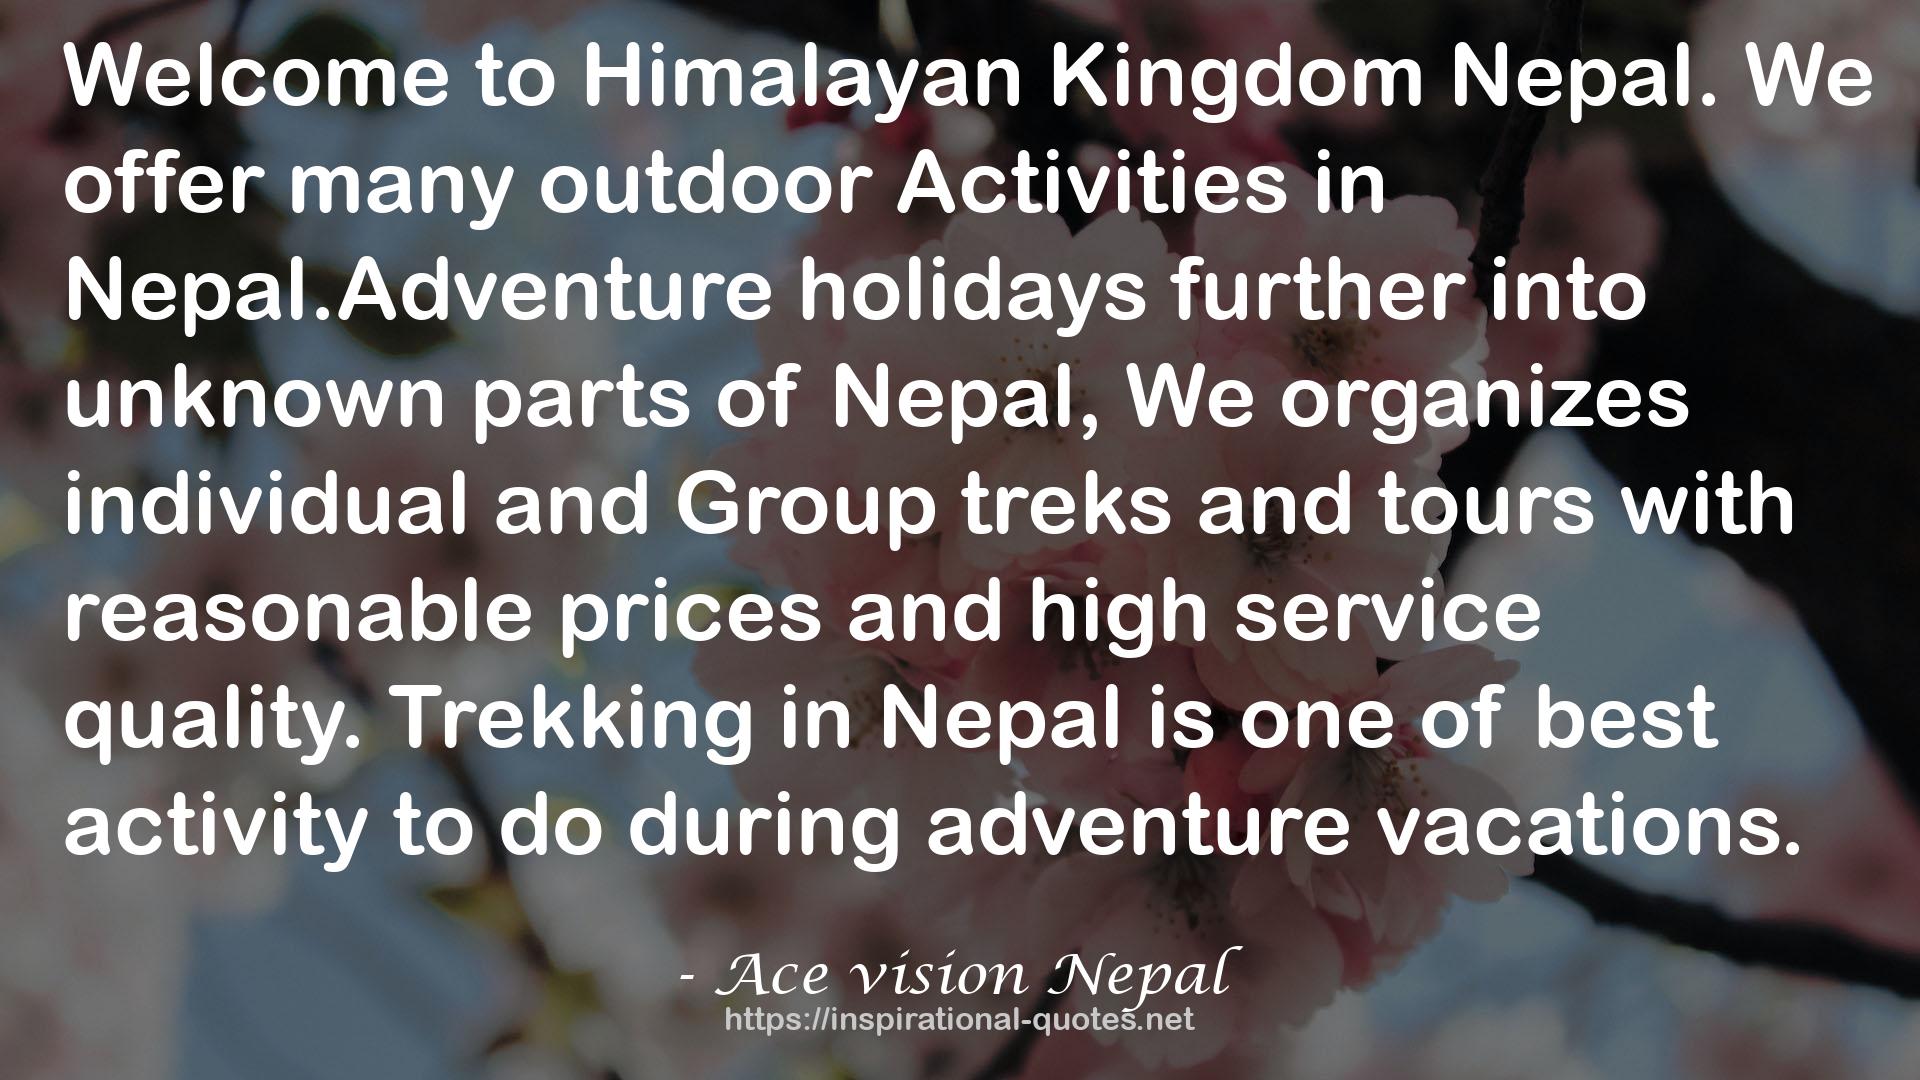 Ace vision Nepal QUOTES